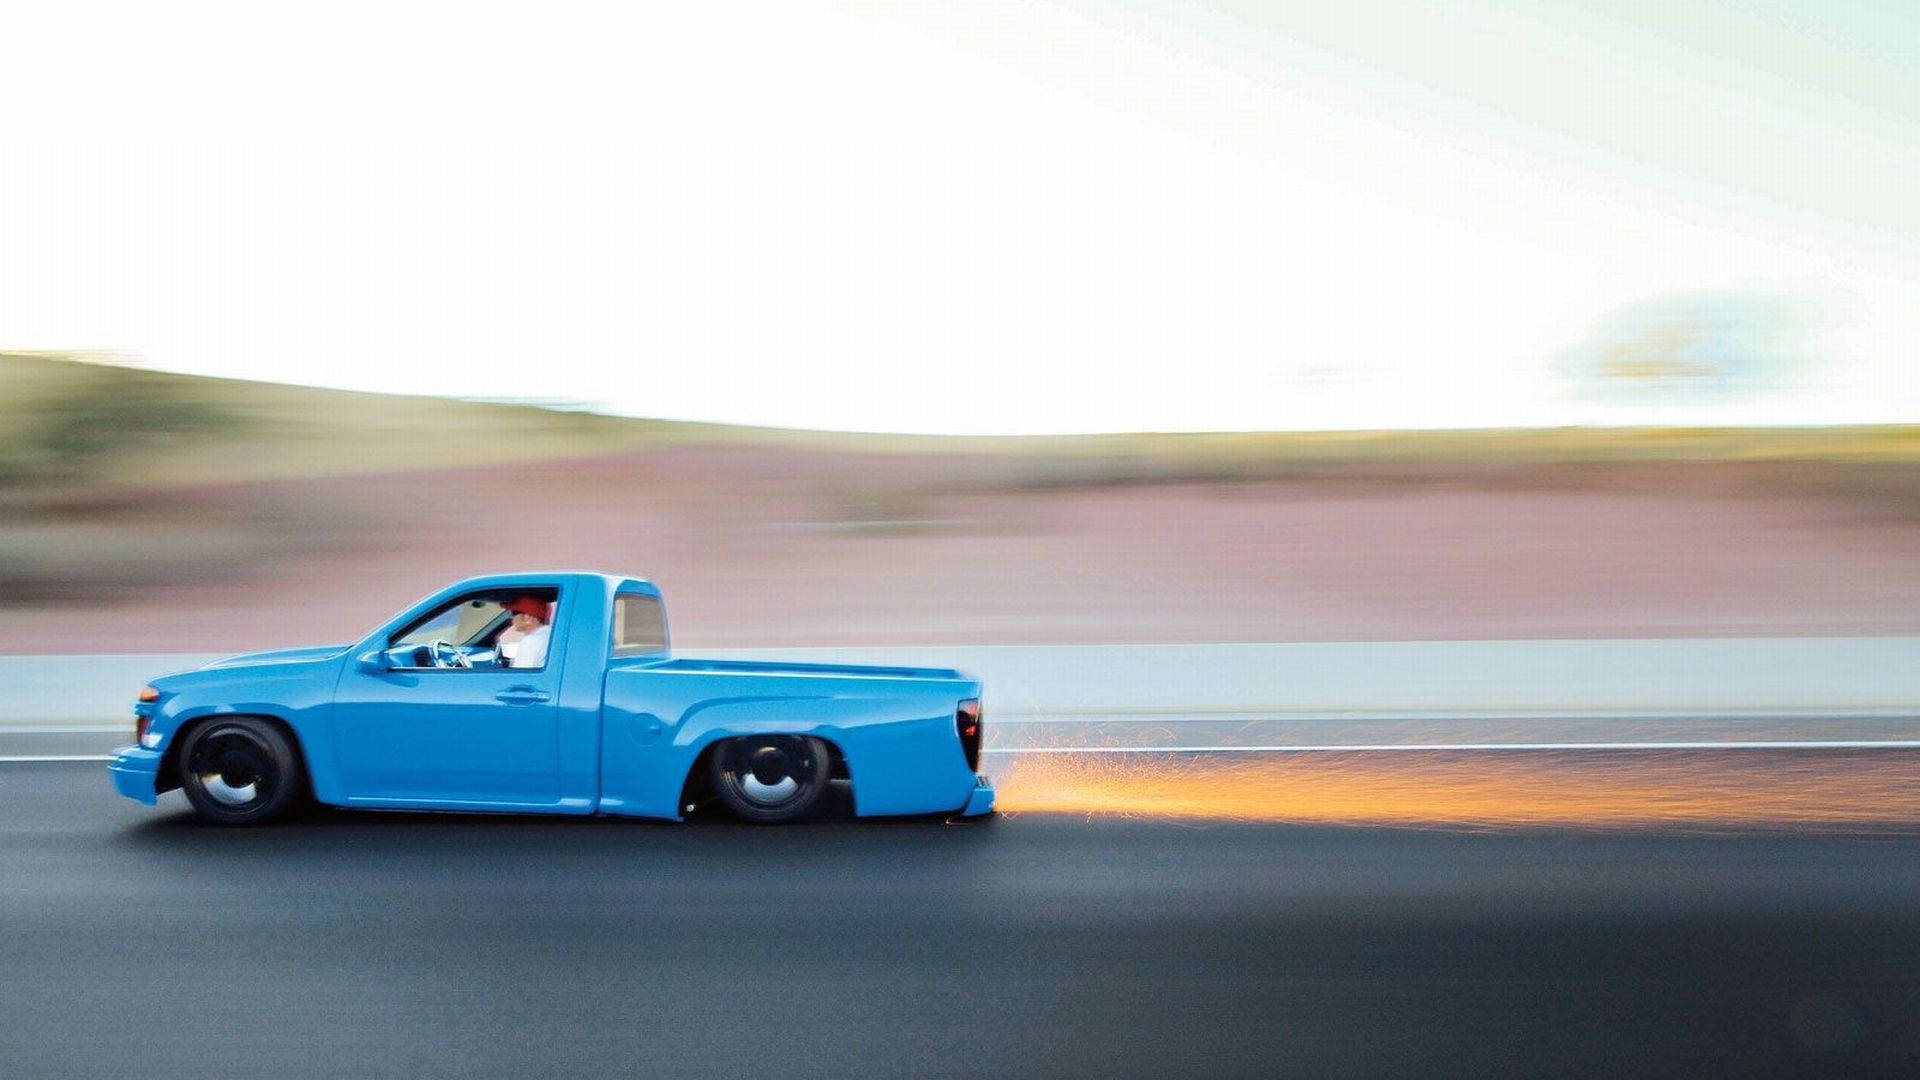 Vibrant Blue Dropped Truck In Motion